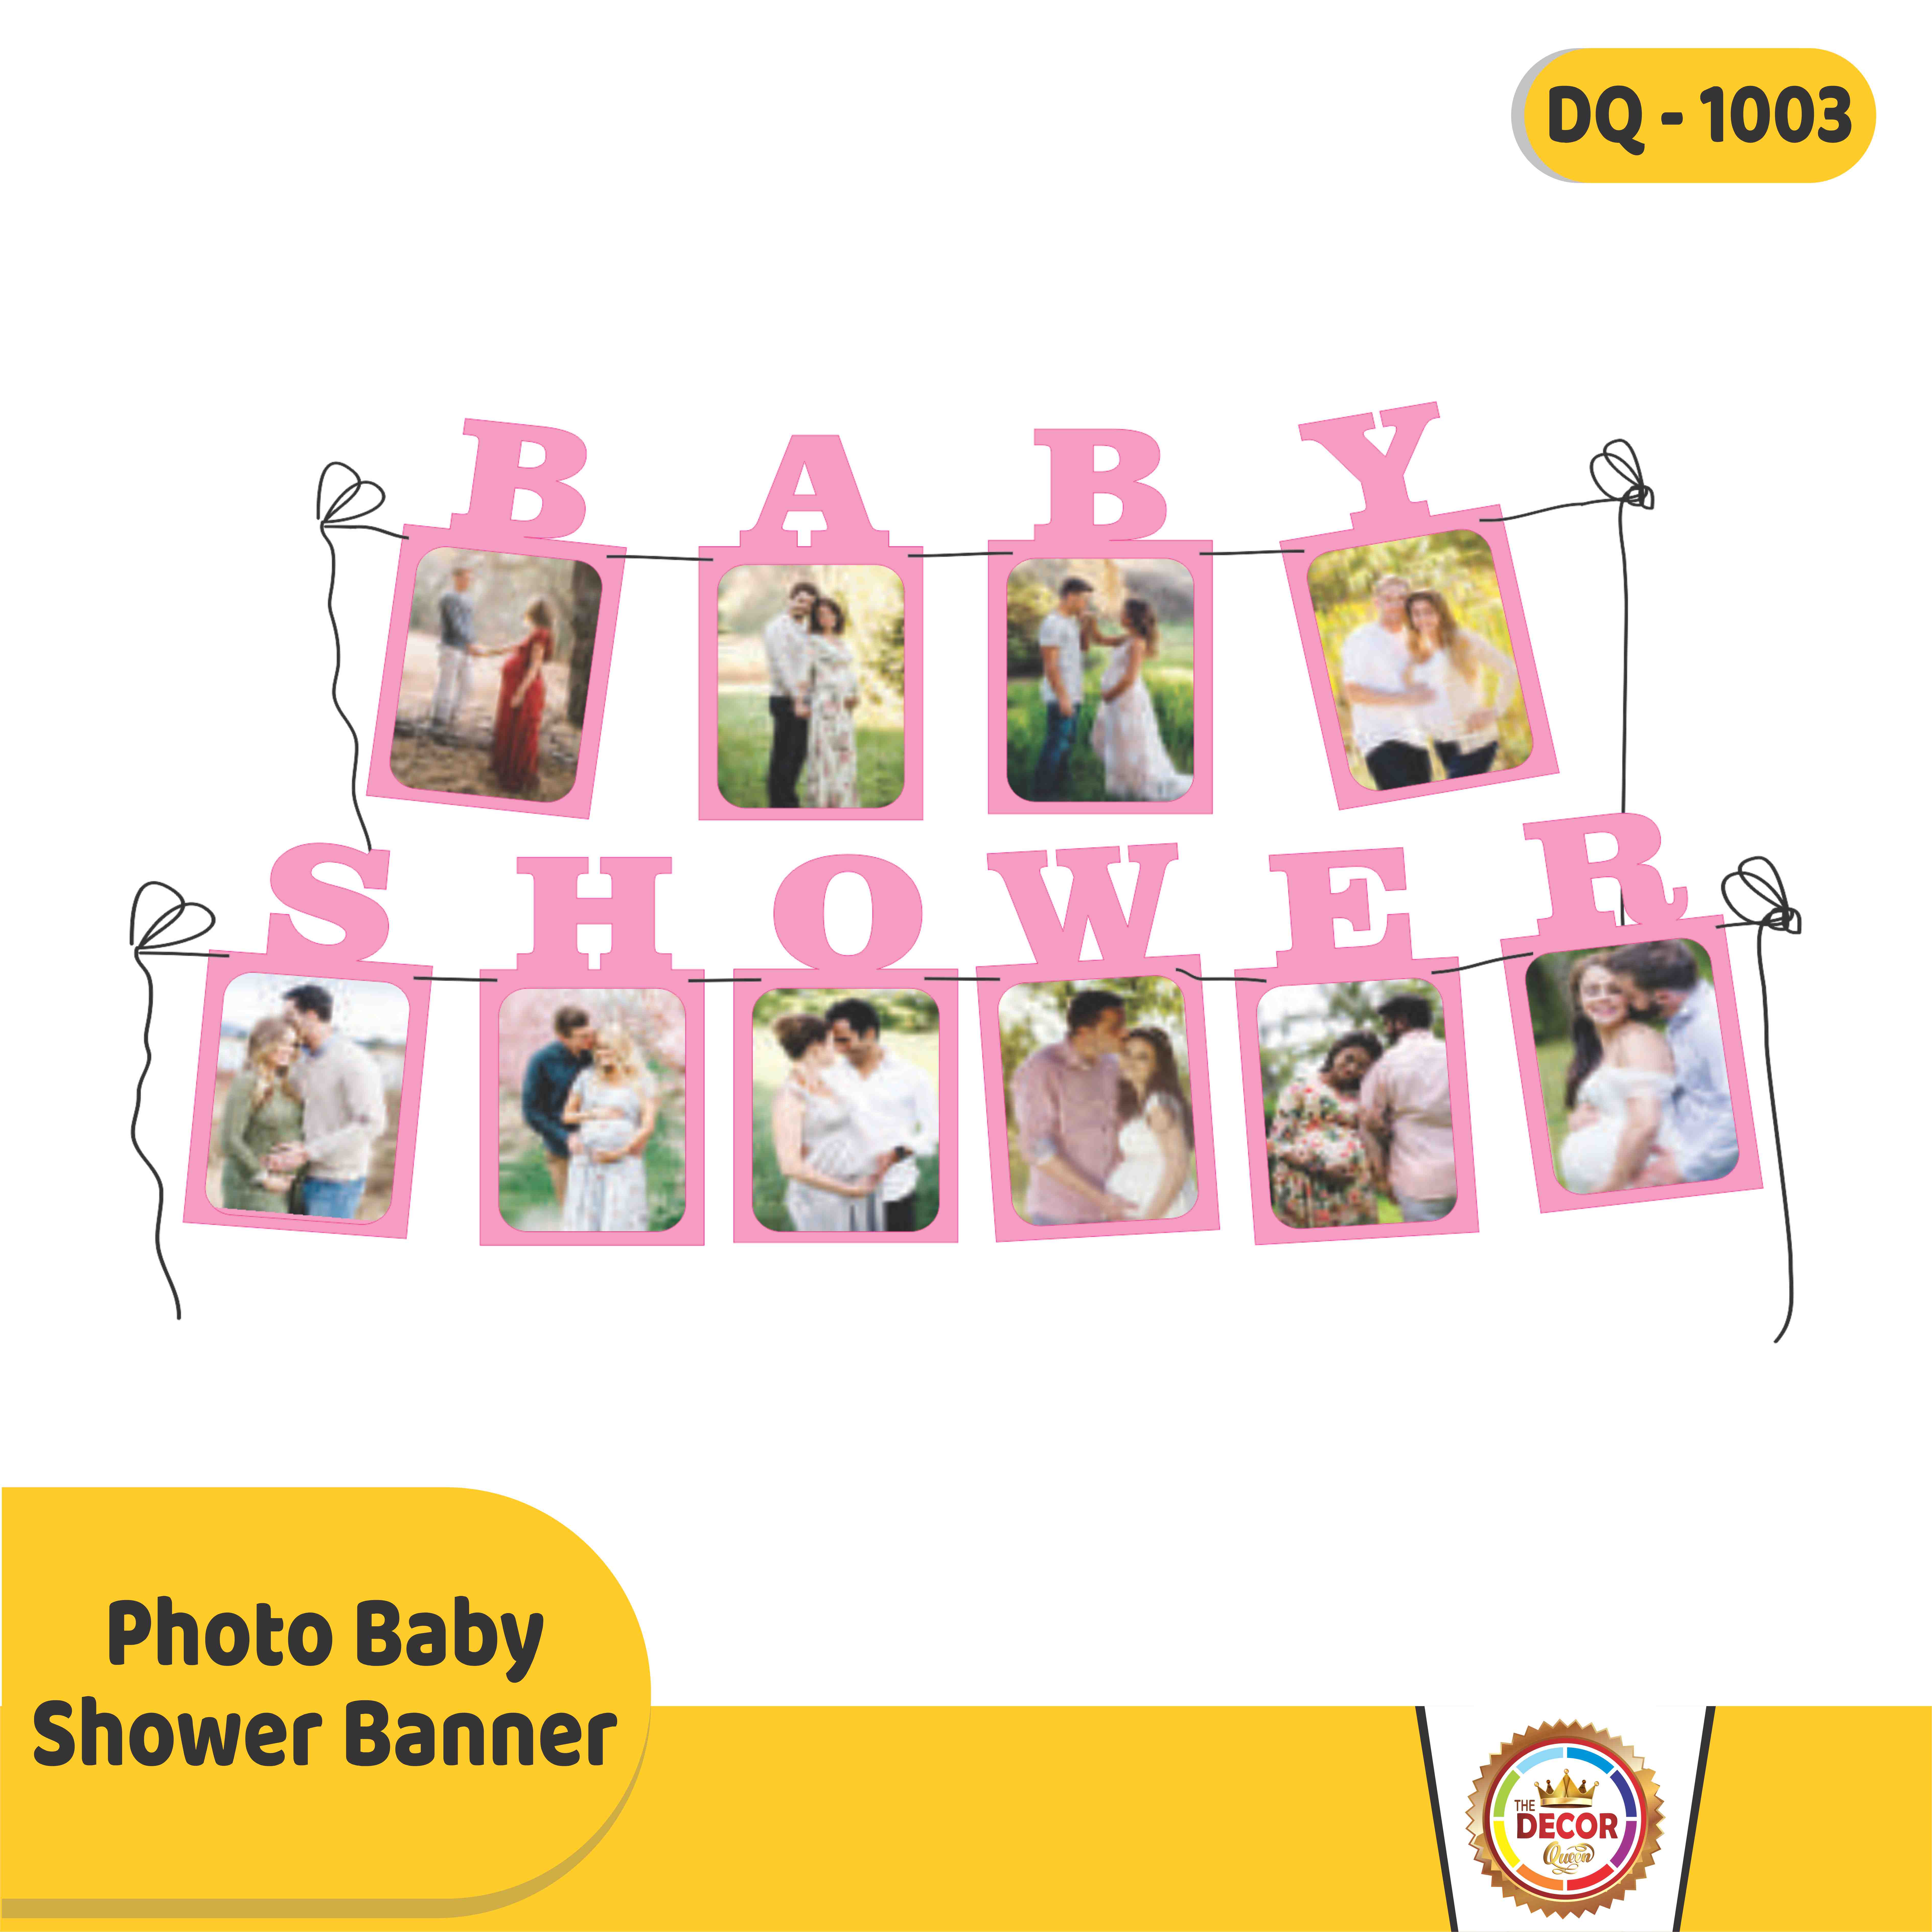 PHOTO BABY SHOWER BANNER|Banners|Photo Banner